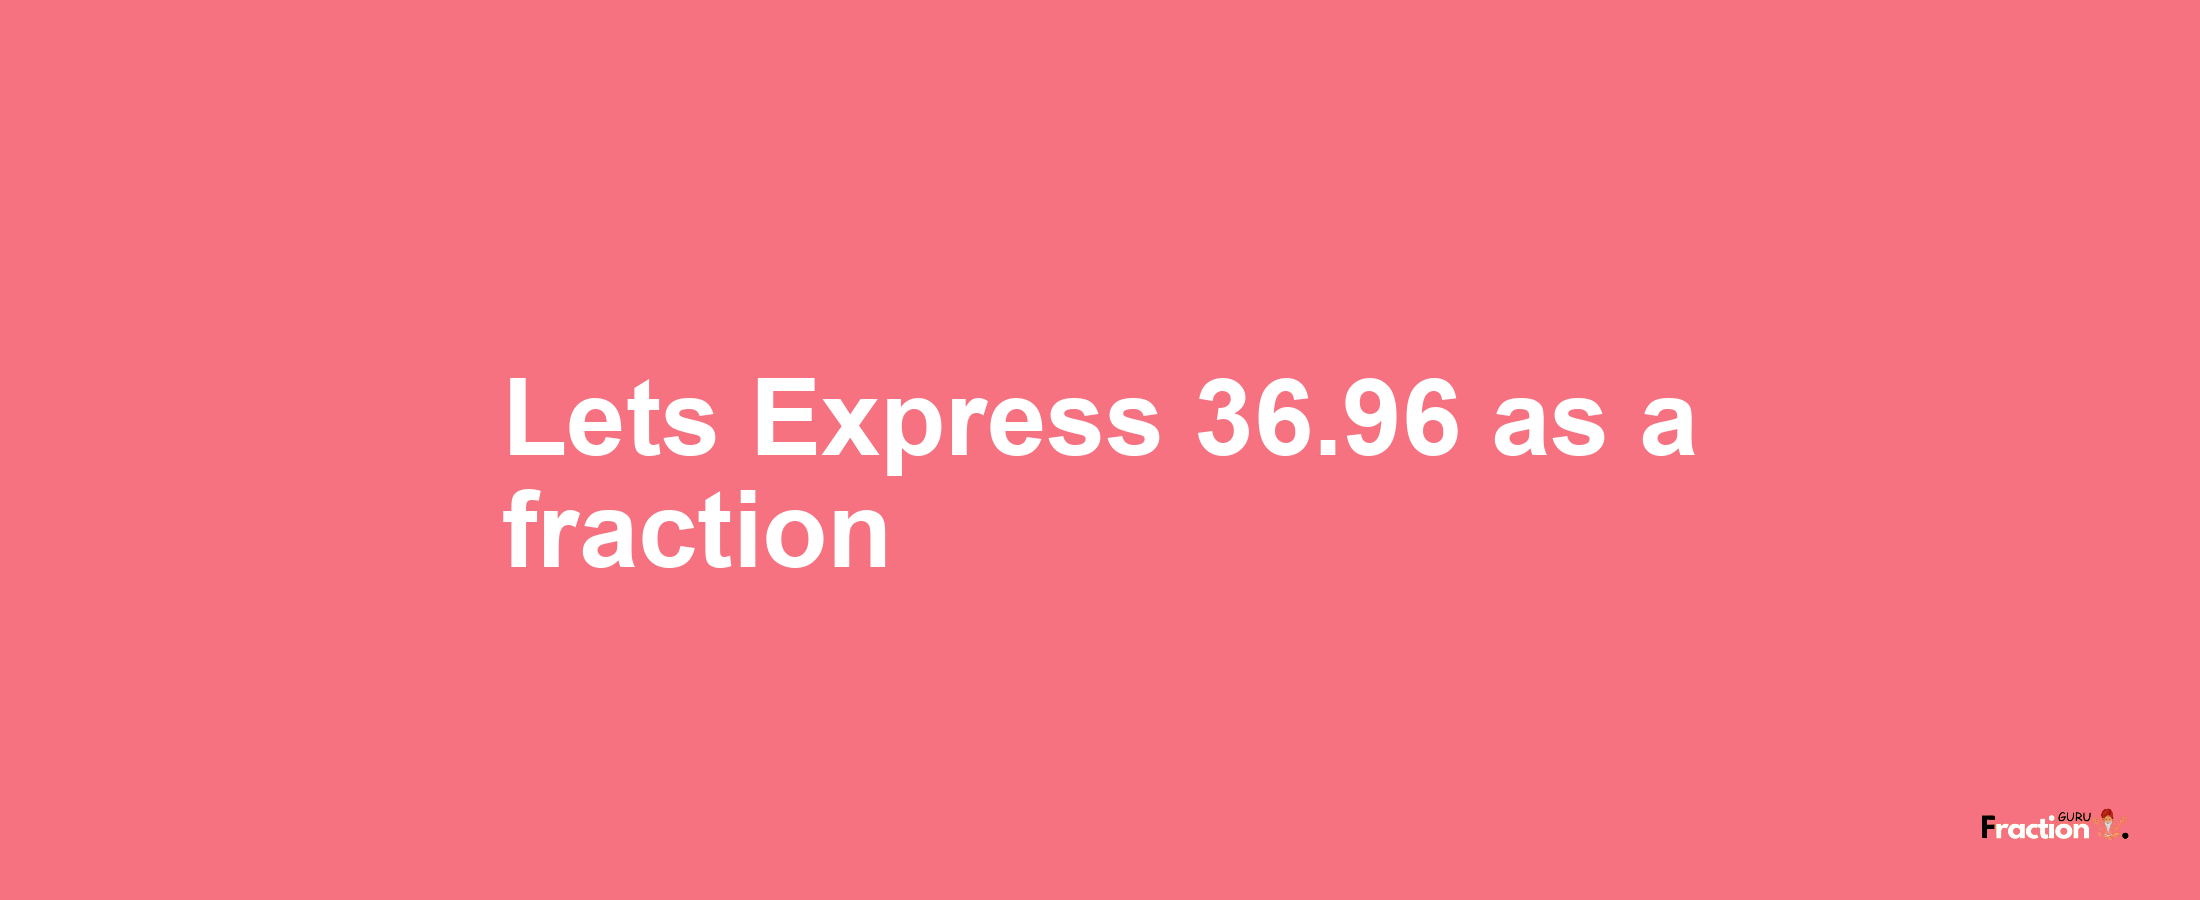 Lets Express 36.96 as afraction